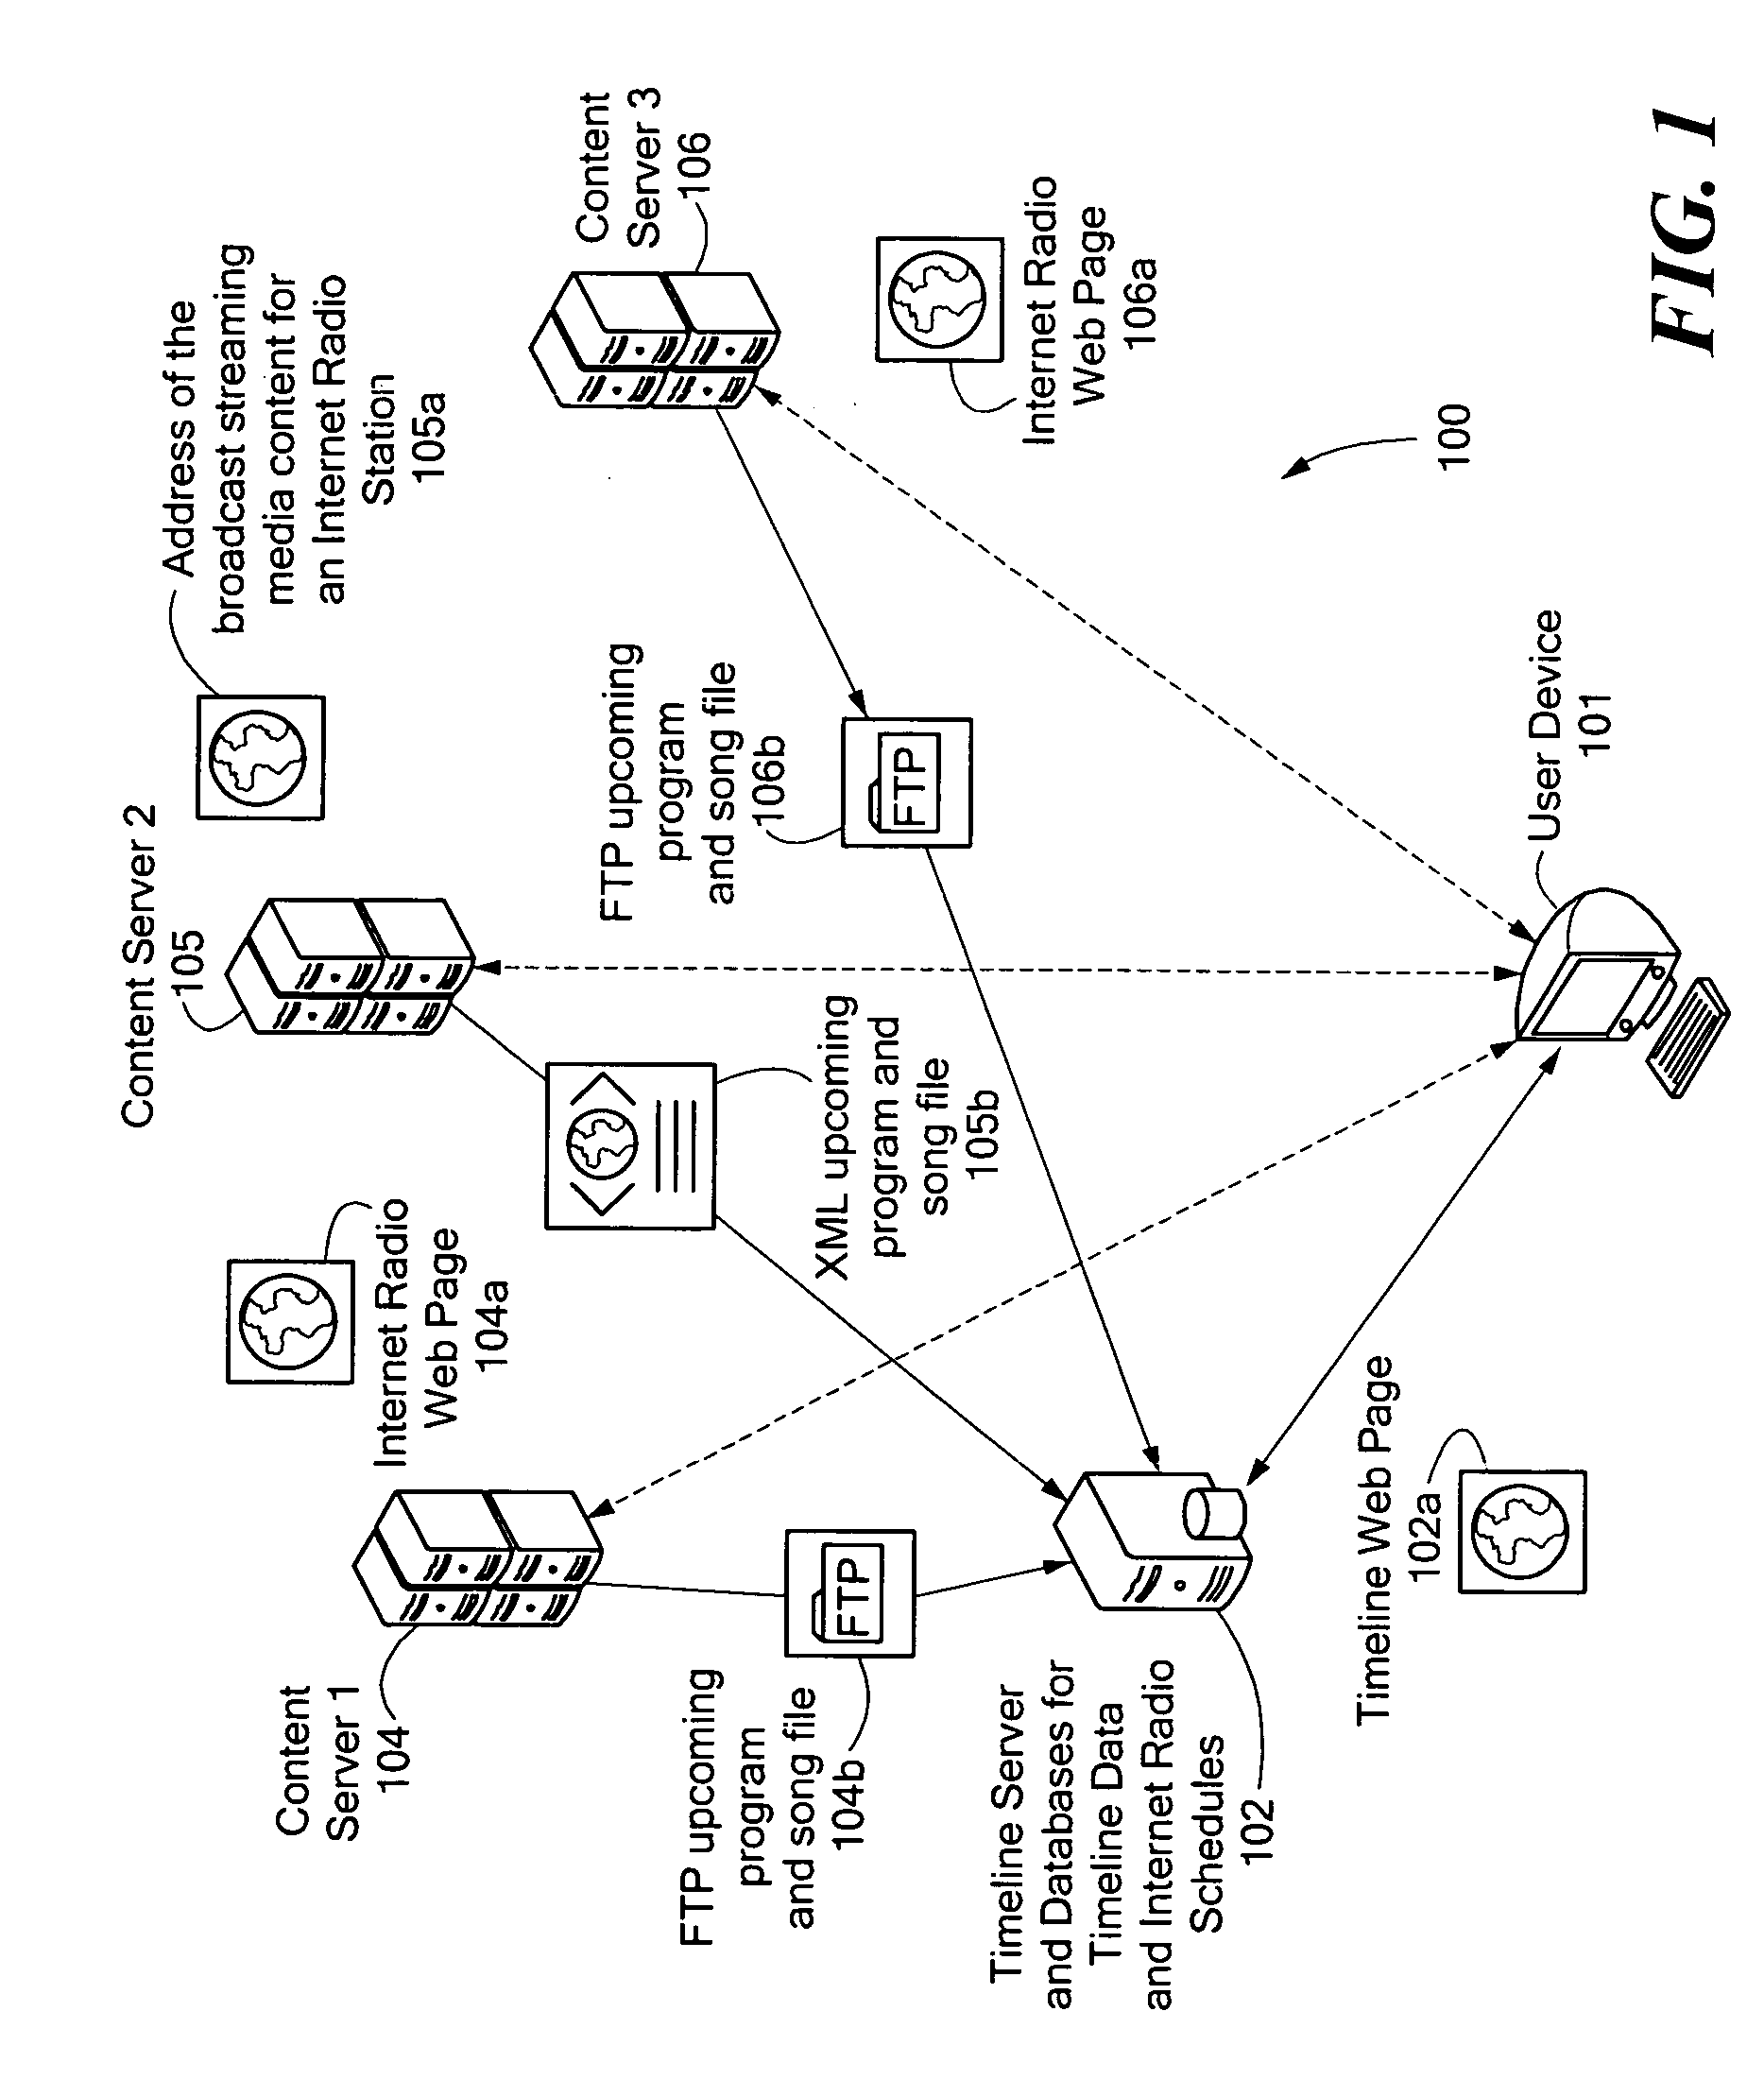 Systems and Methods for Creation and Use of a Timeline of Broadcast Streaming Media Programs